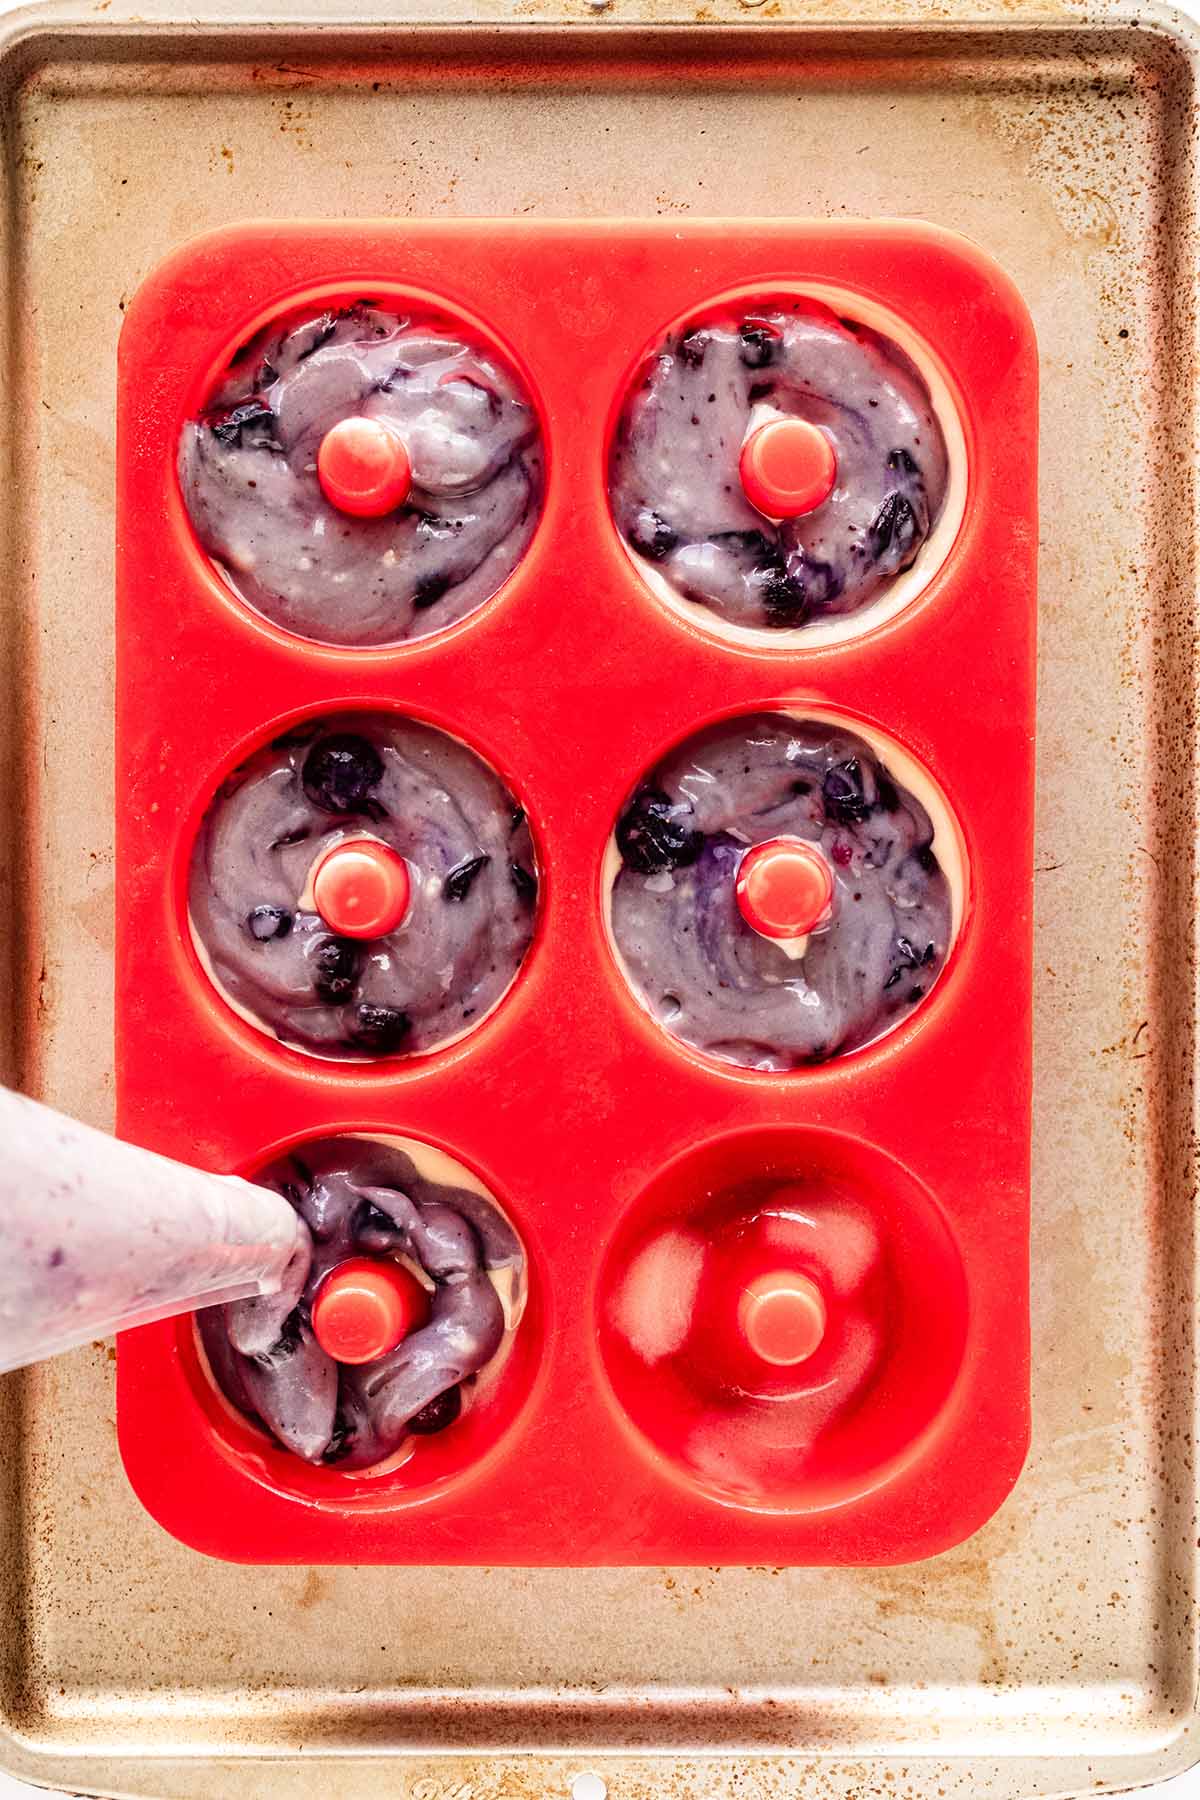 Blueberry donut batter being piped into donut pan